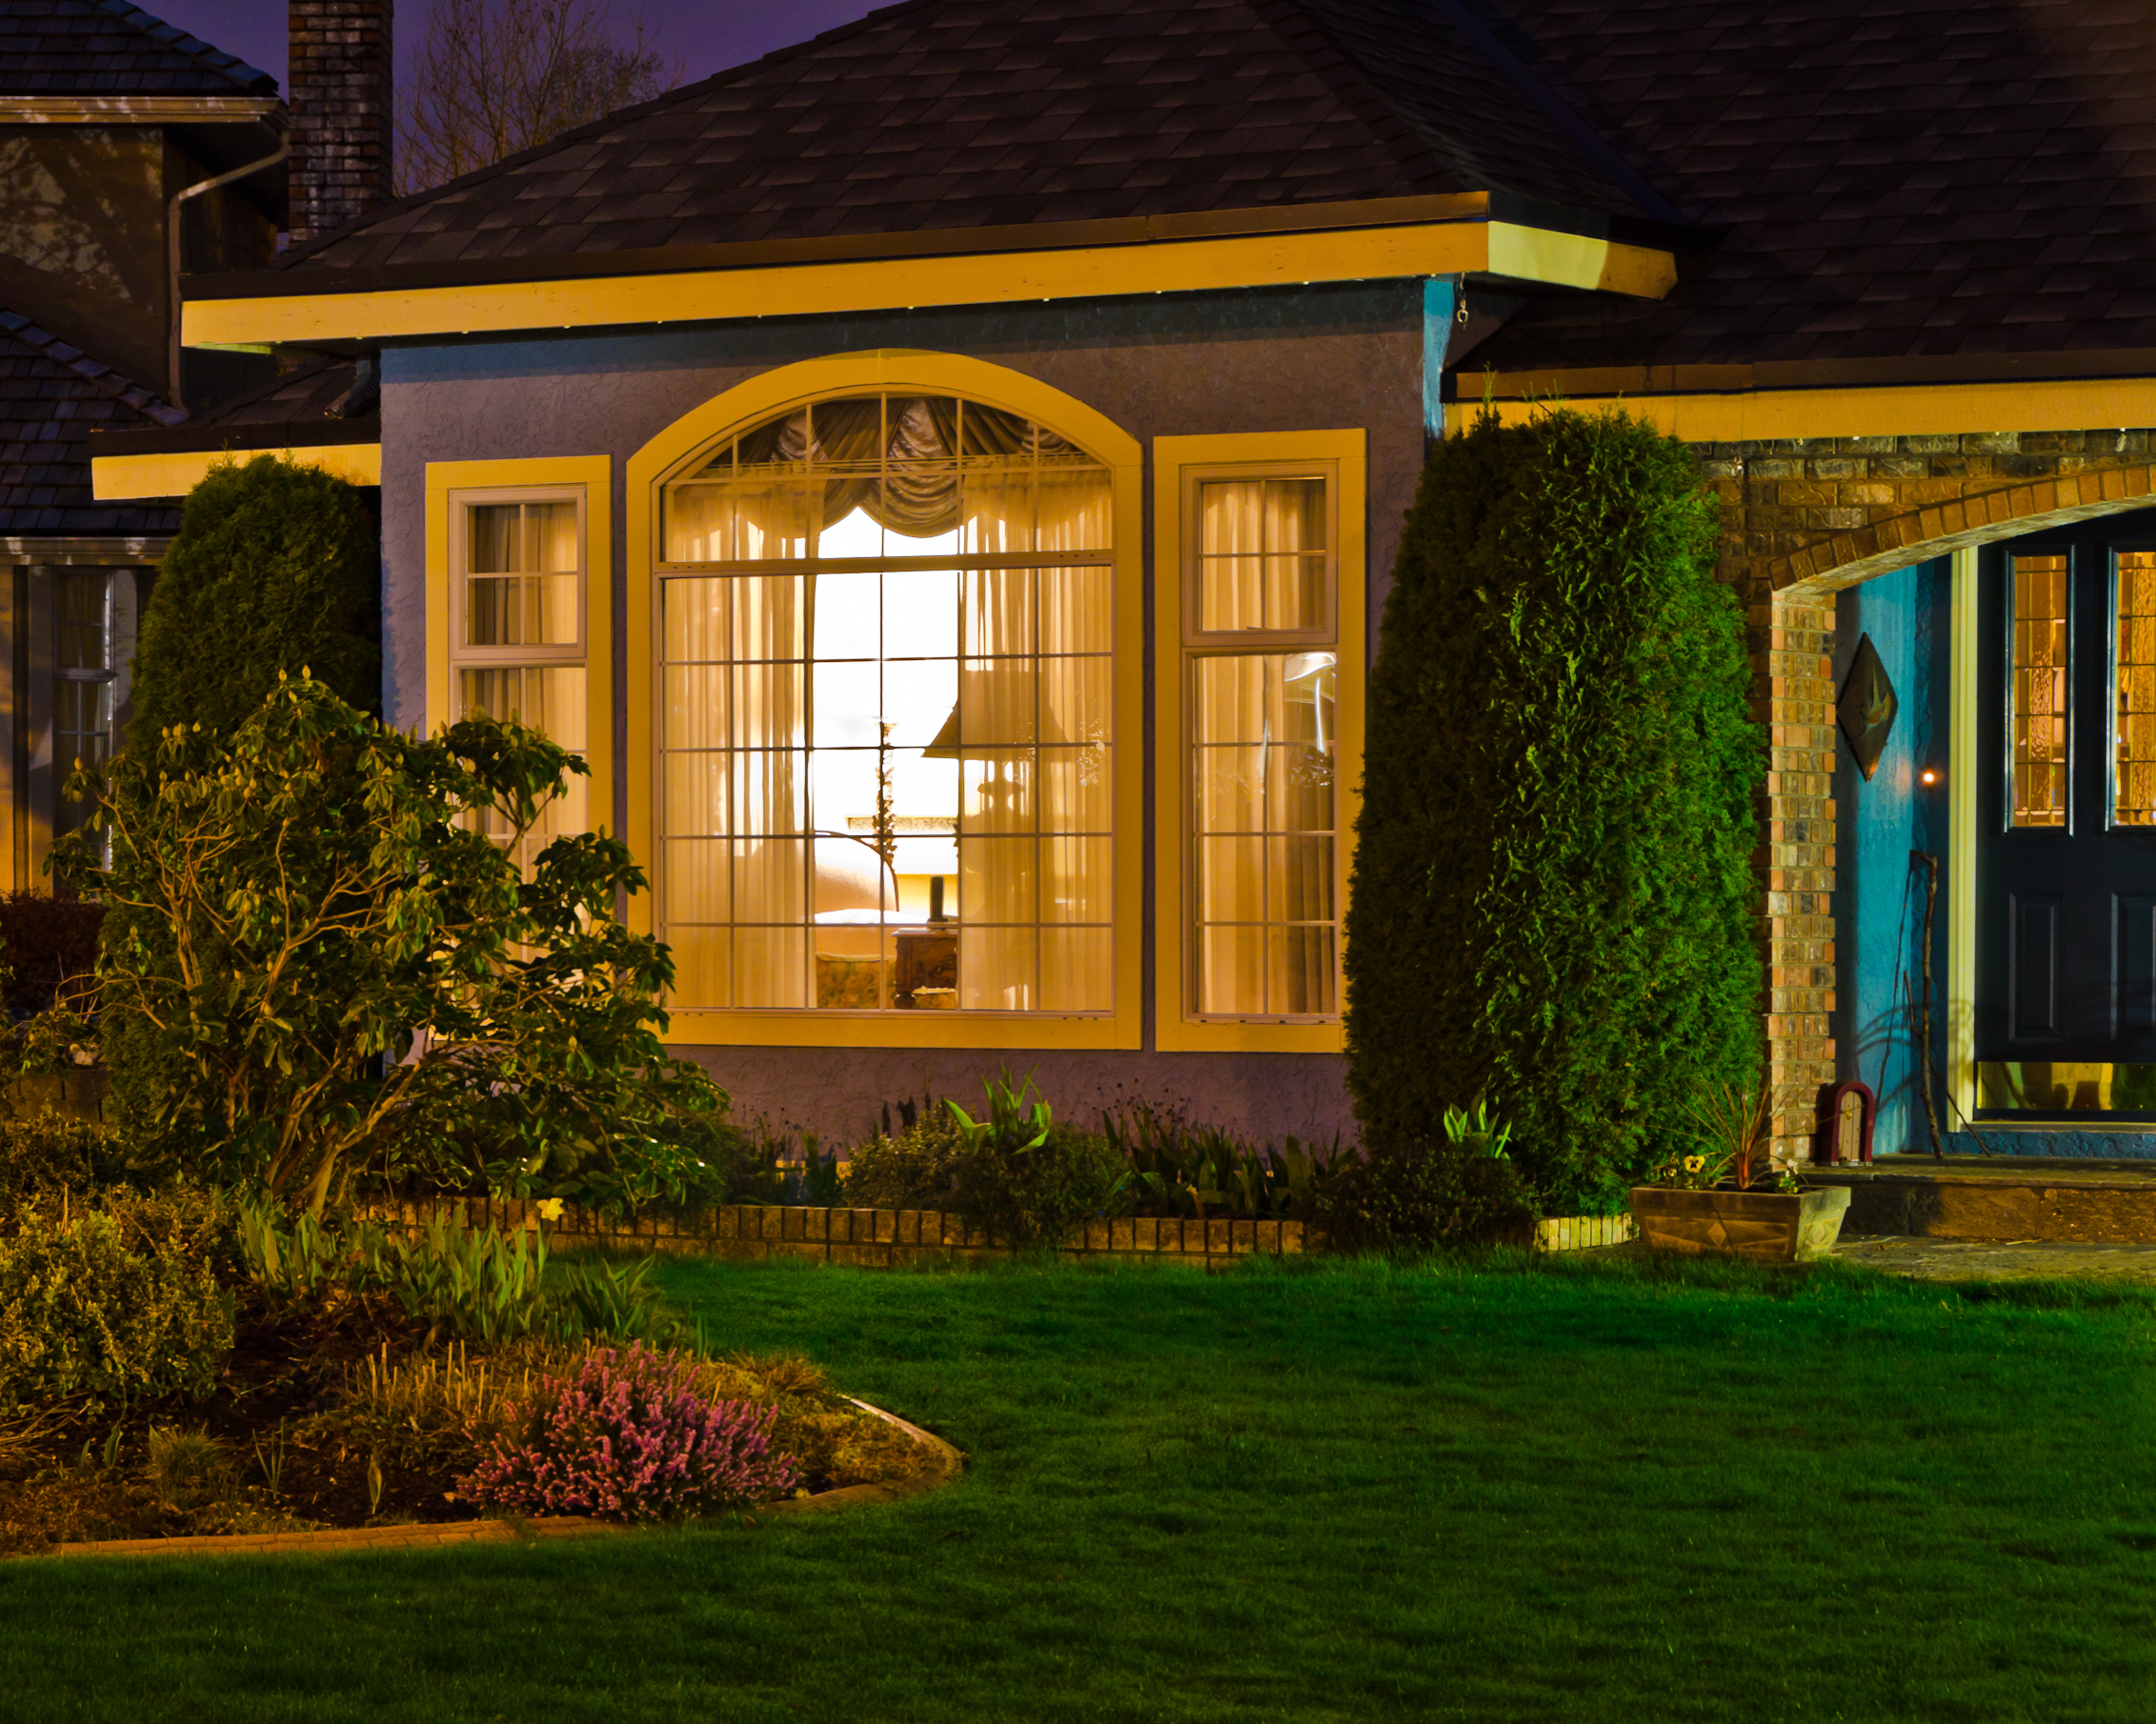 Entrance of a house at night. | Source: Shutterstock